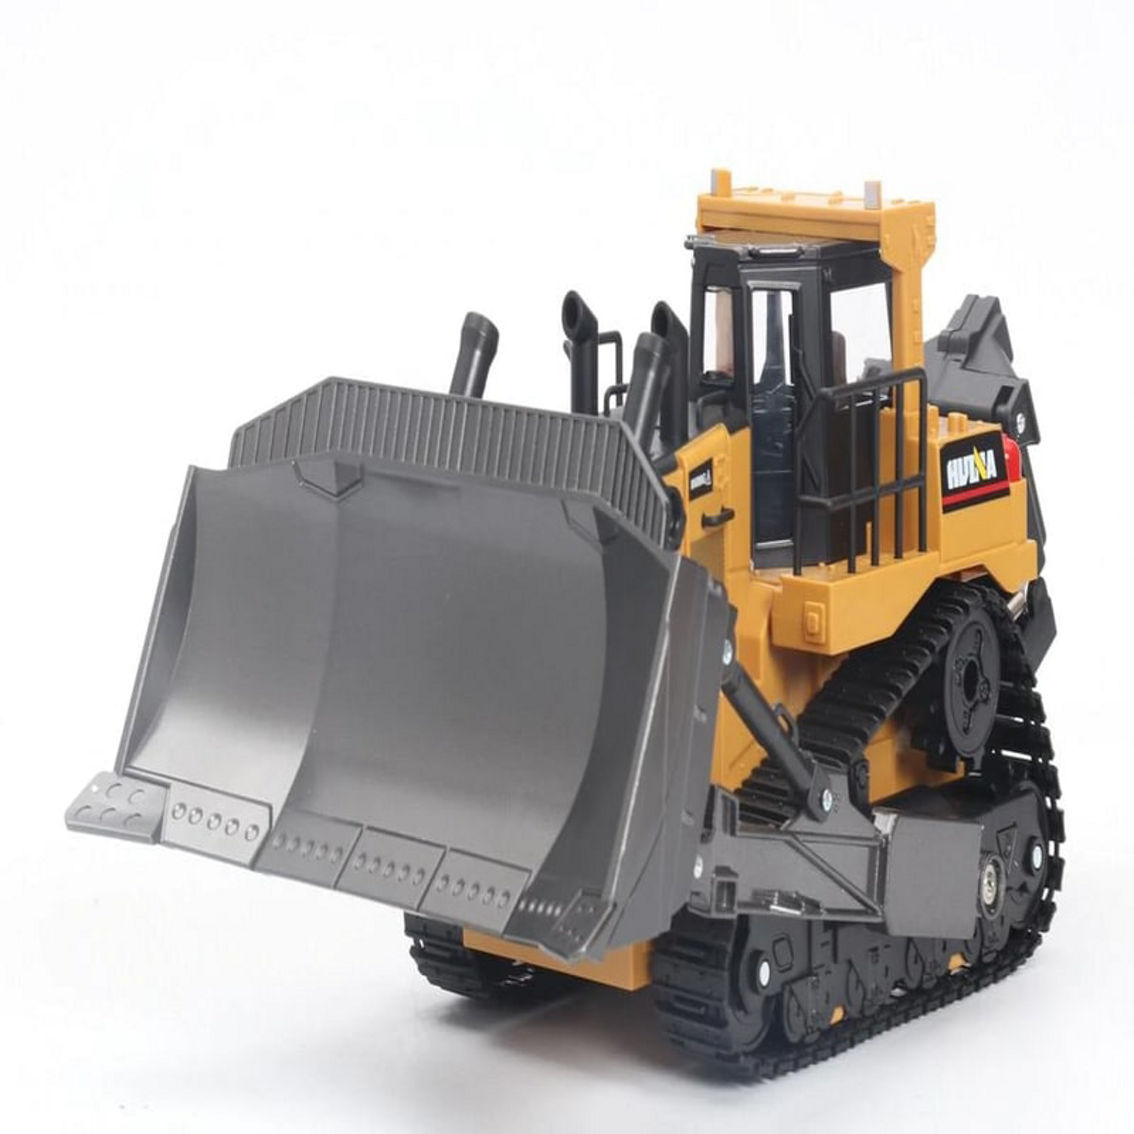 CIS-1569 1:16 scale 11 Ch Bulldozer with 2.4 GHz remote and rechargeable batteries - Image 3 of 5